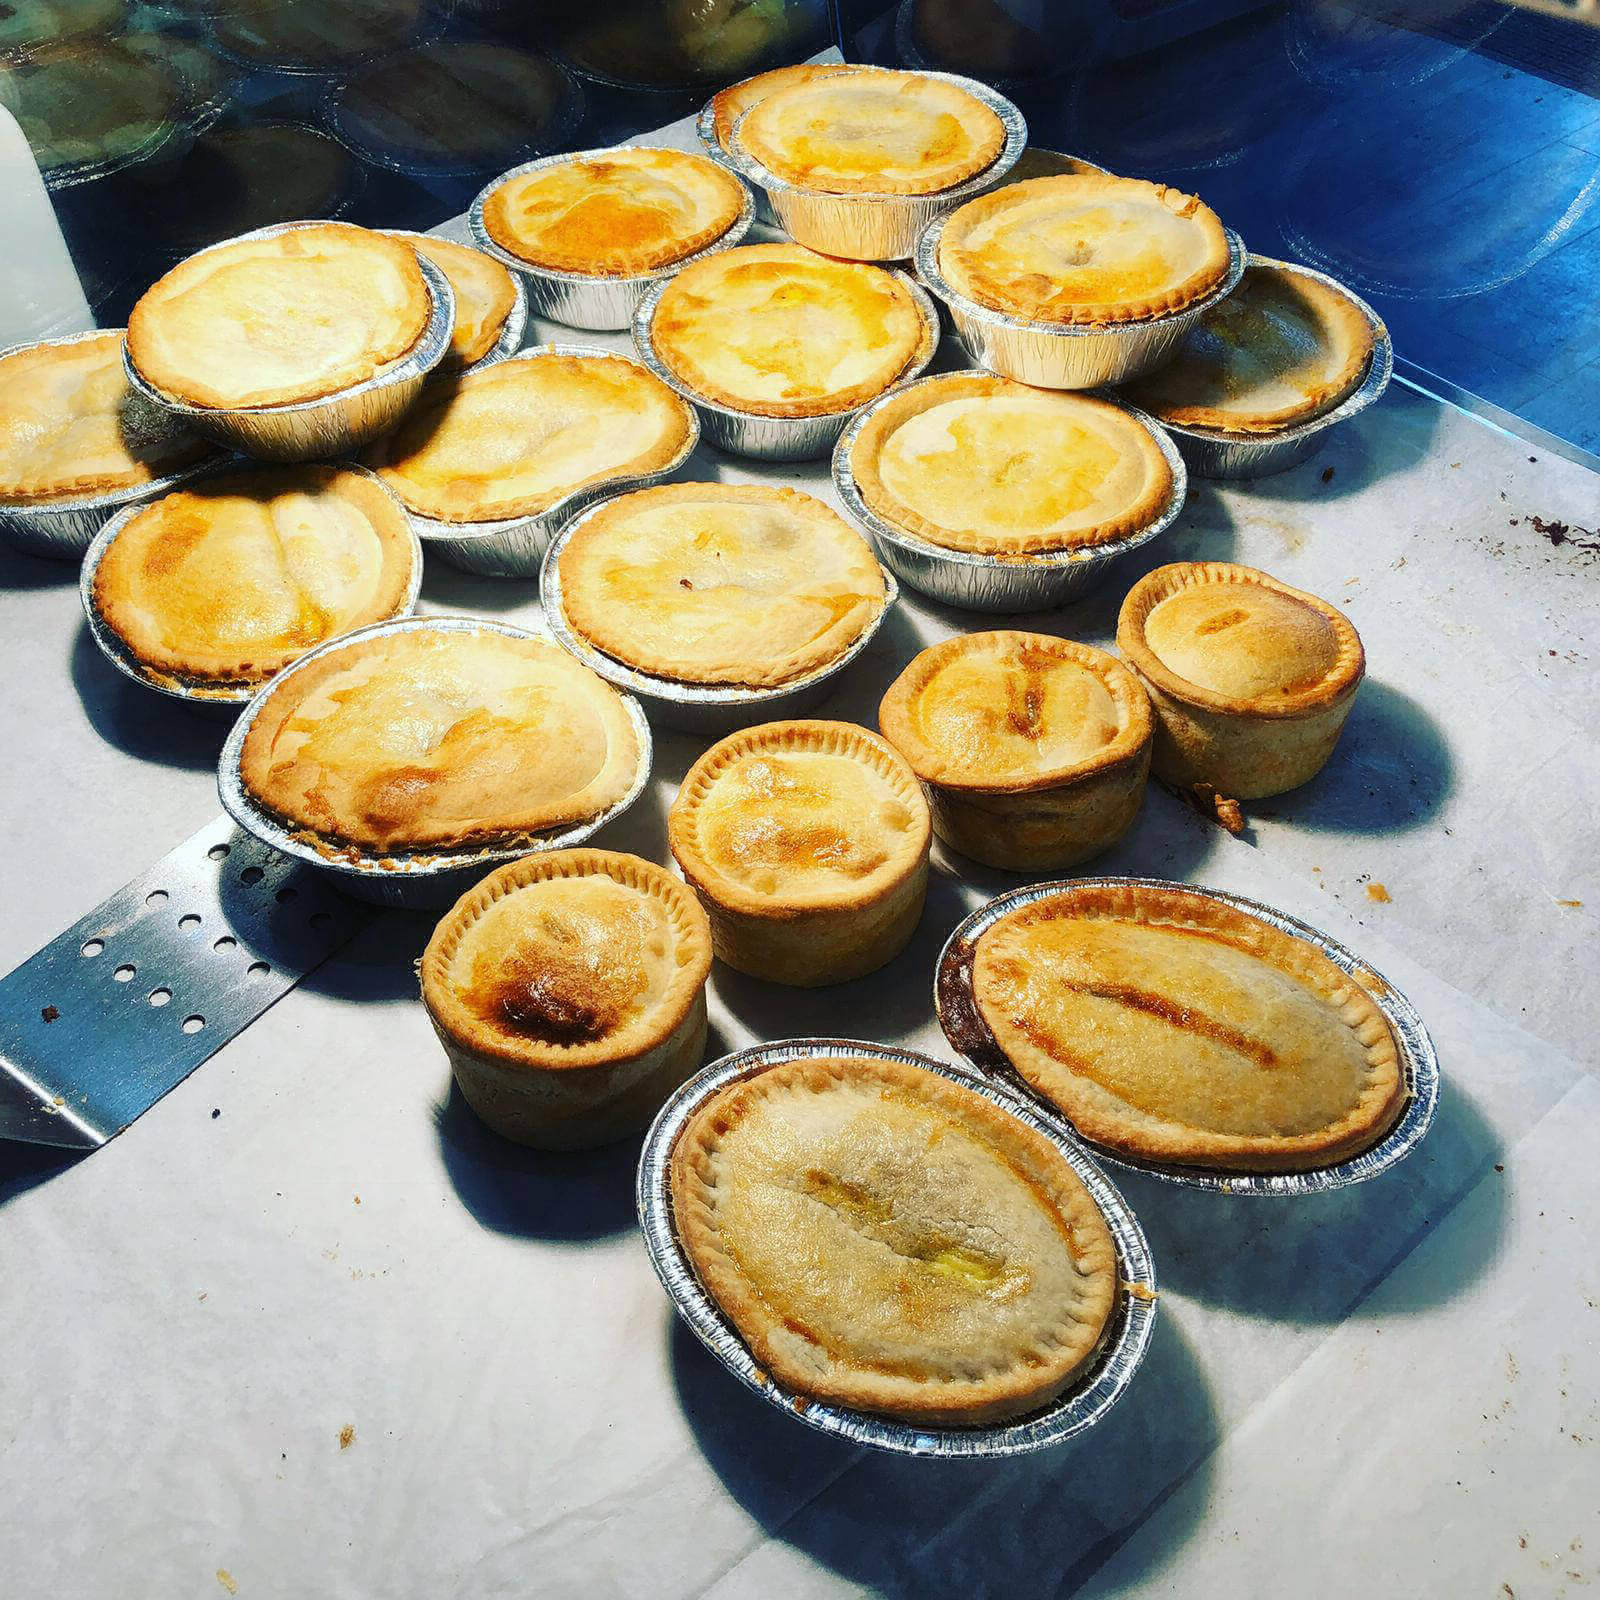 Good selection of freshly baked pies